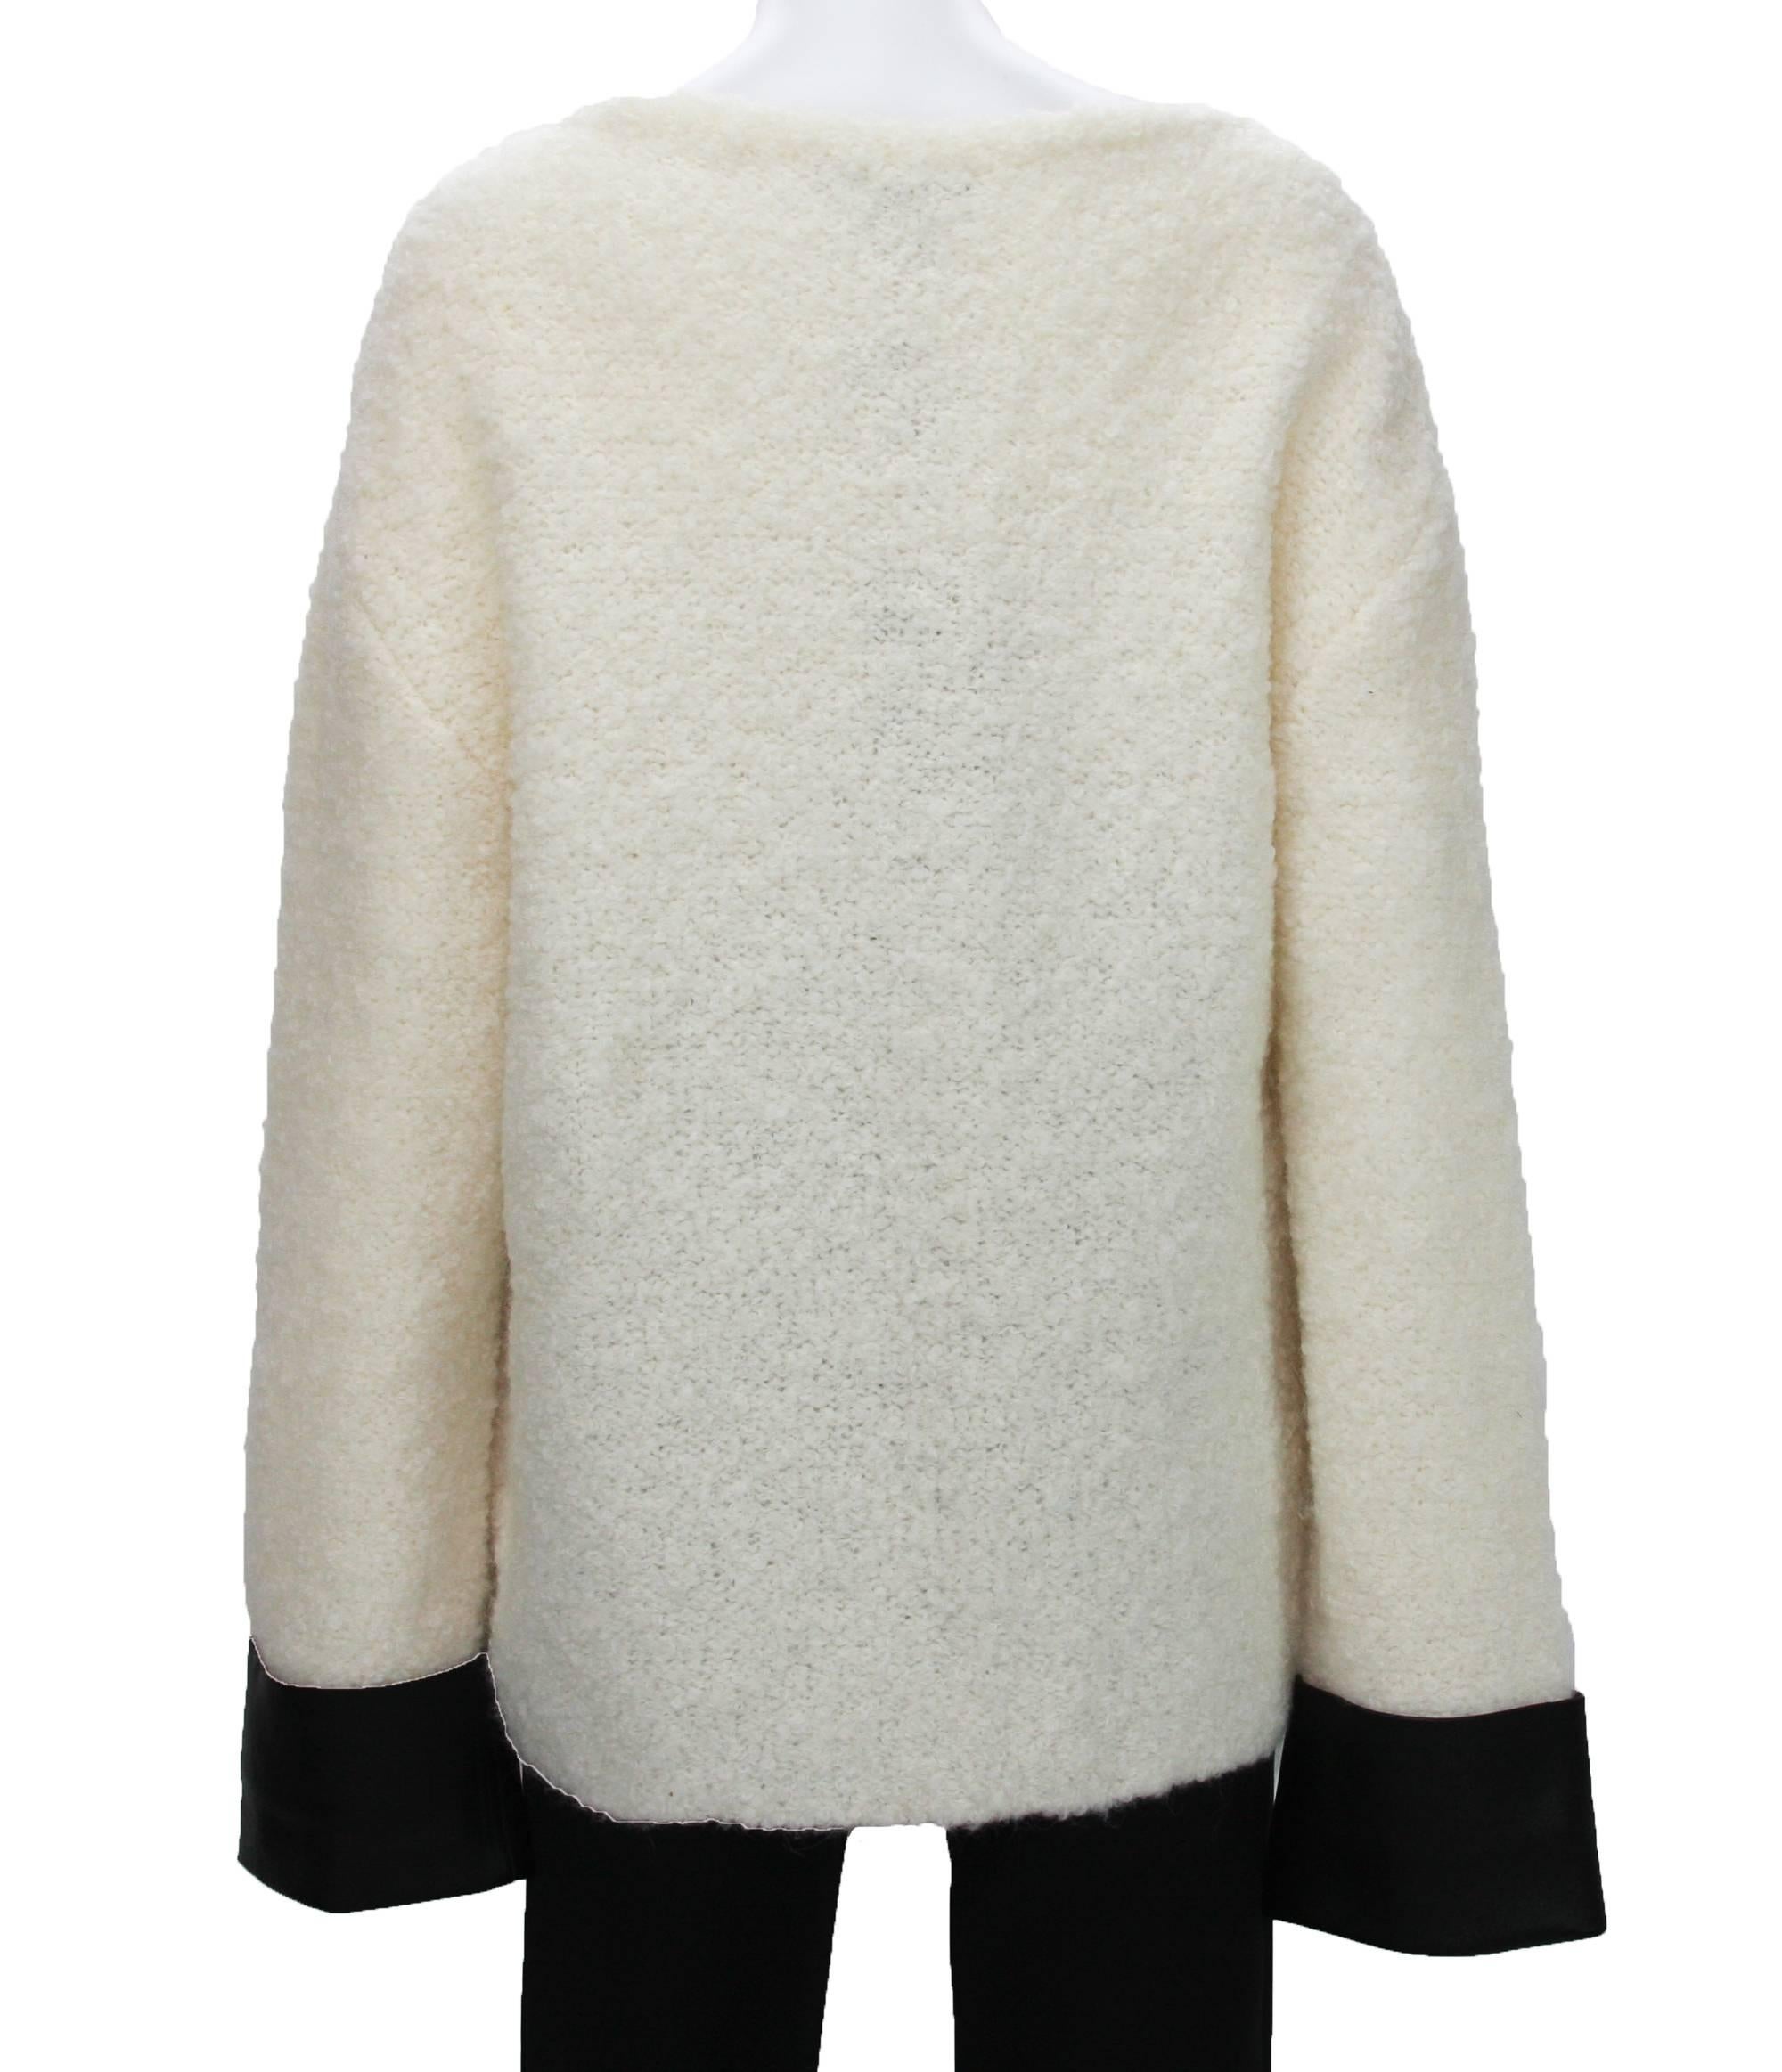 Gucci Boucle Wool Alpaca Cream Knitted Sweater w/ Leather Cuffs 2